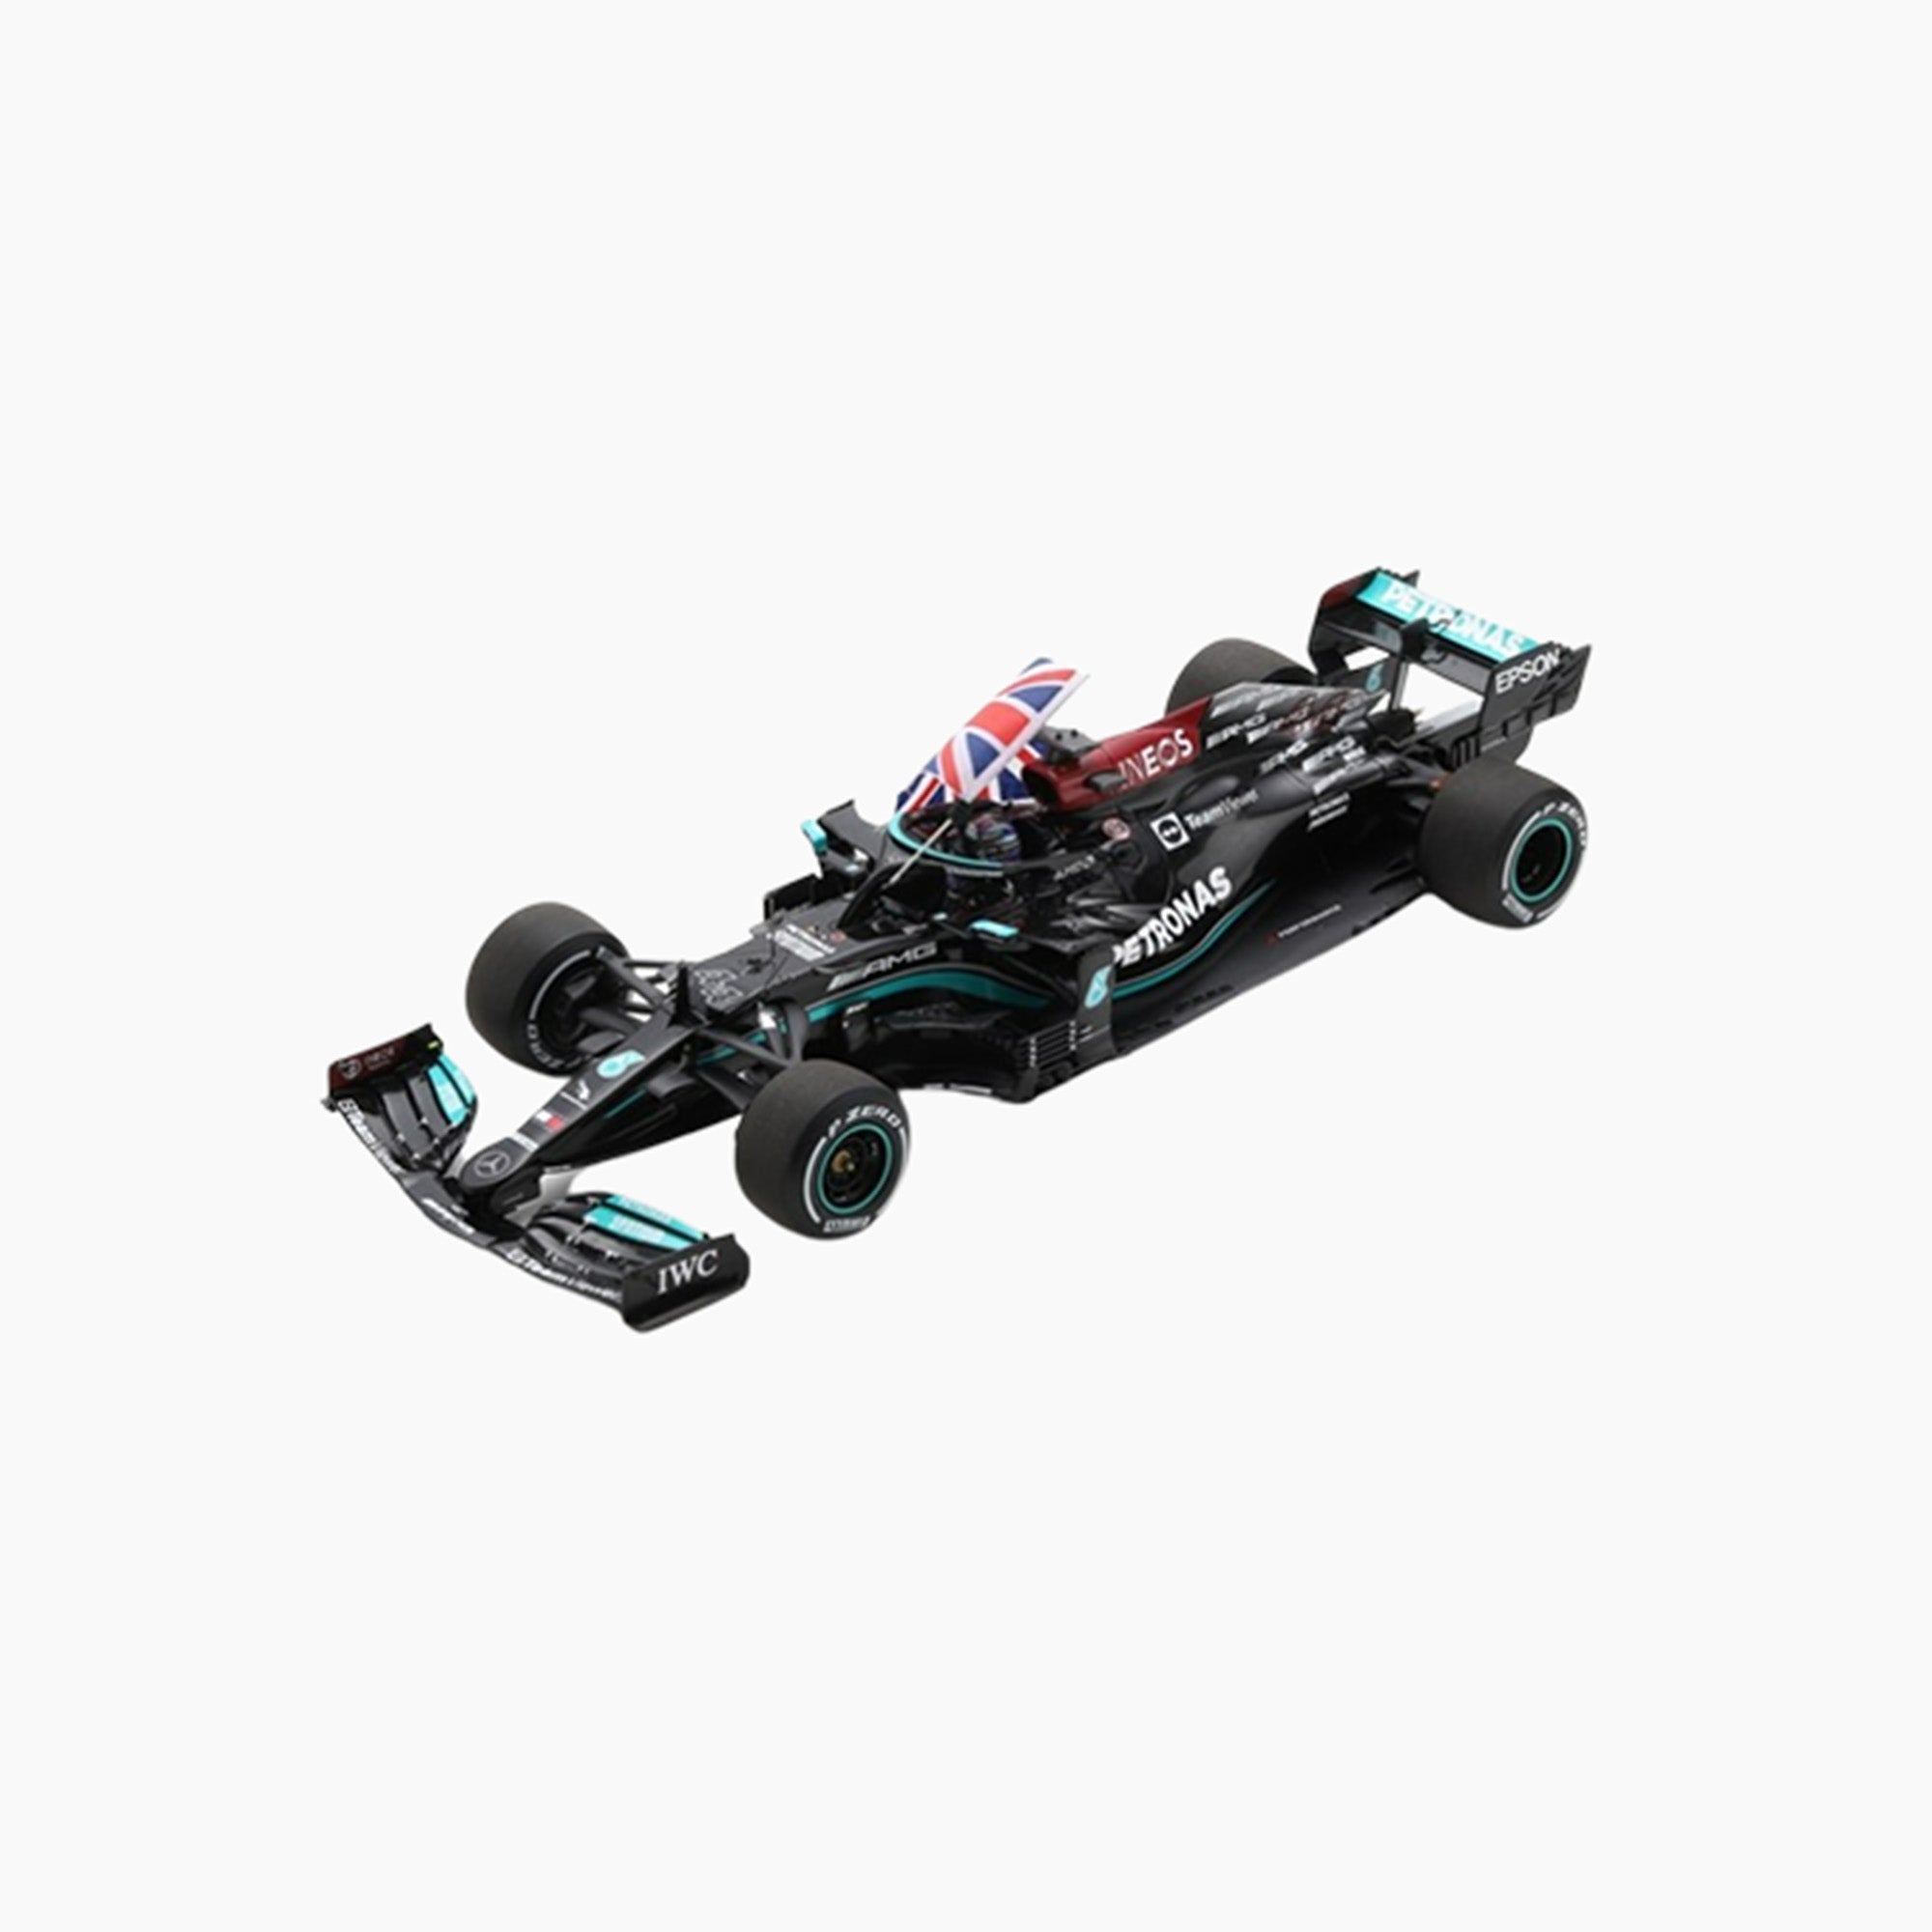 Mercedes-AMG Petronas Formula One Team No.44 | 1:18 Scale Model-1:18 Scale Model-Spark Models-gpx-store